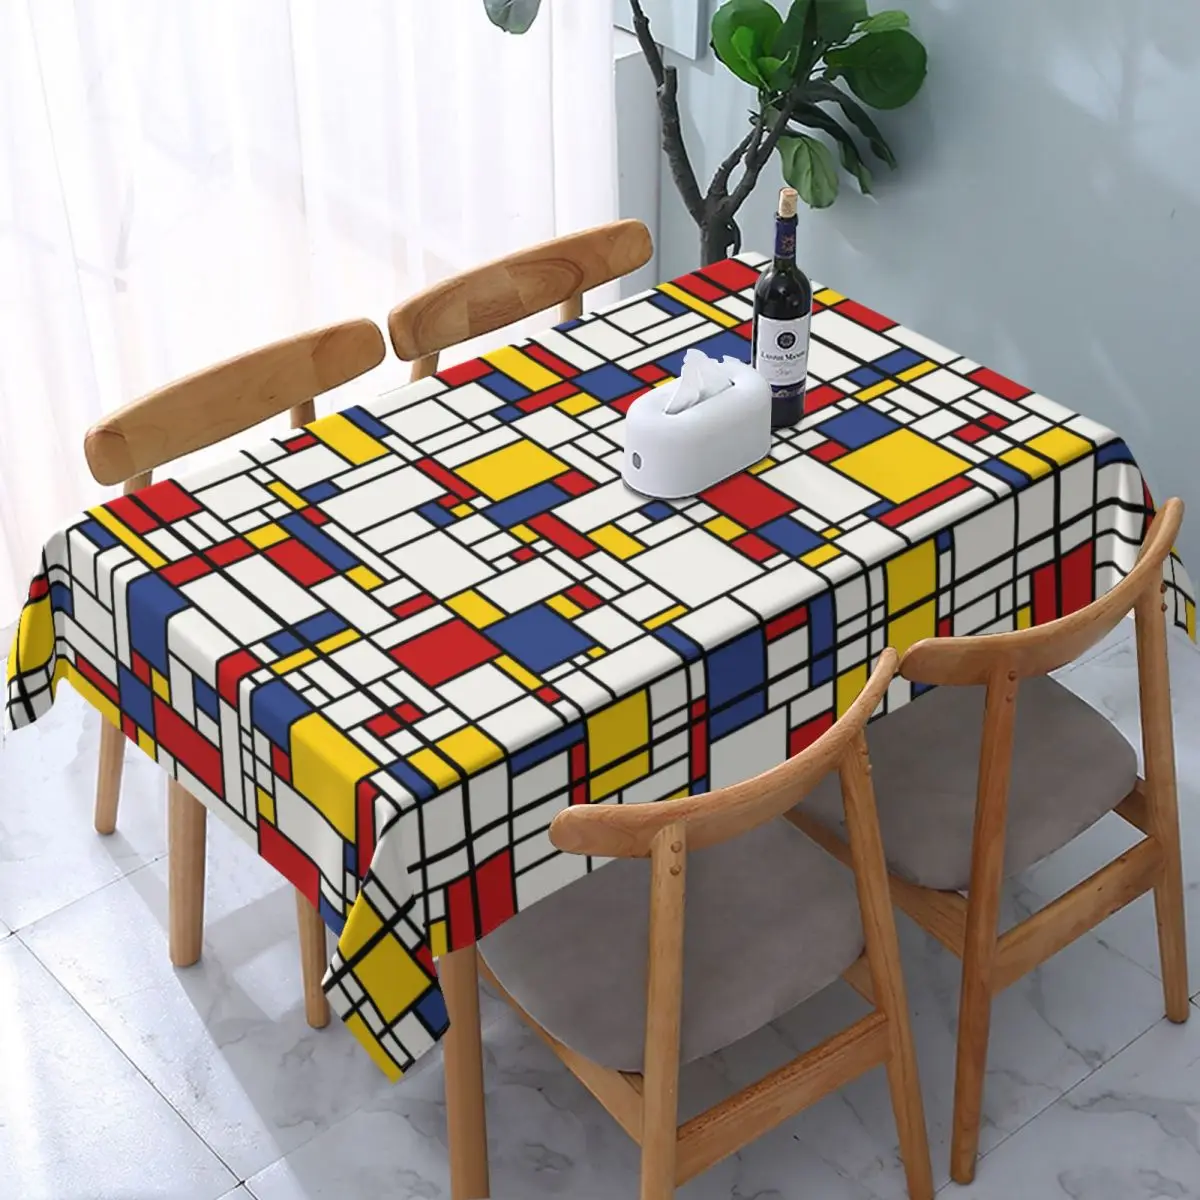 

Piet Mondrian Abstract Pop Art Red Blue Yellow Rectangles Tablecloth Rectangular Geometric Modern Table Cloth Cover for Banquet